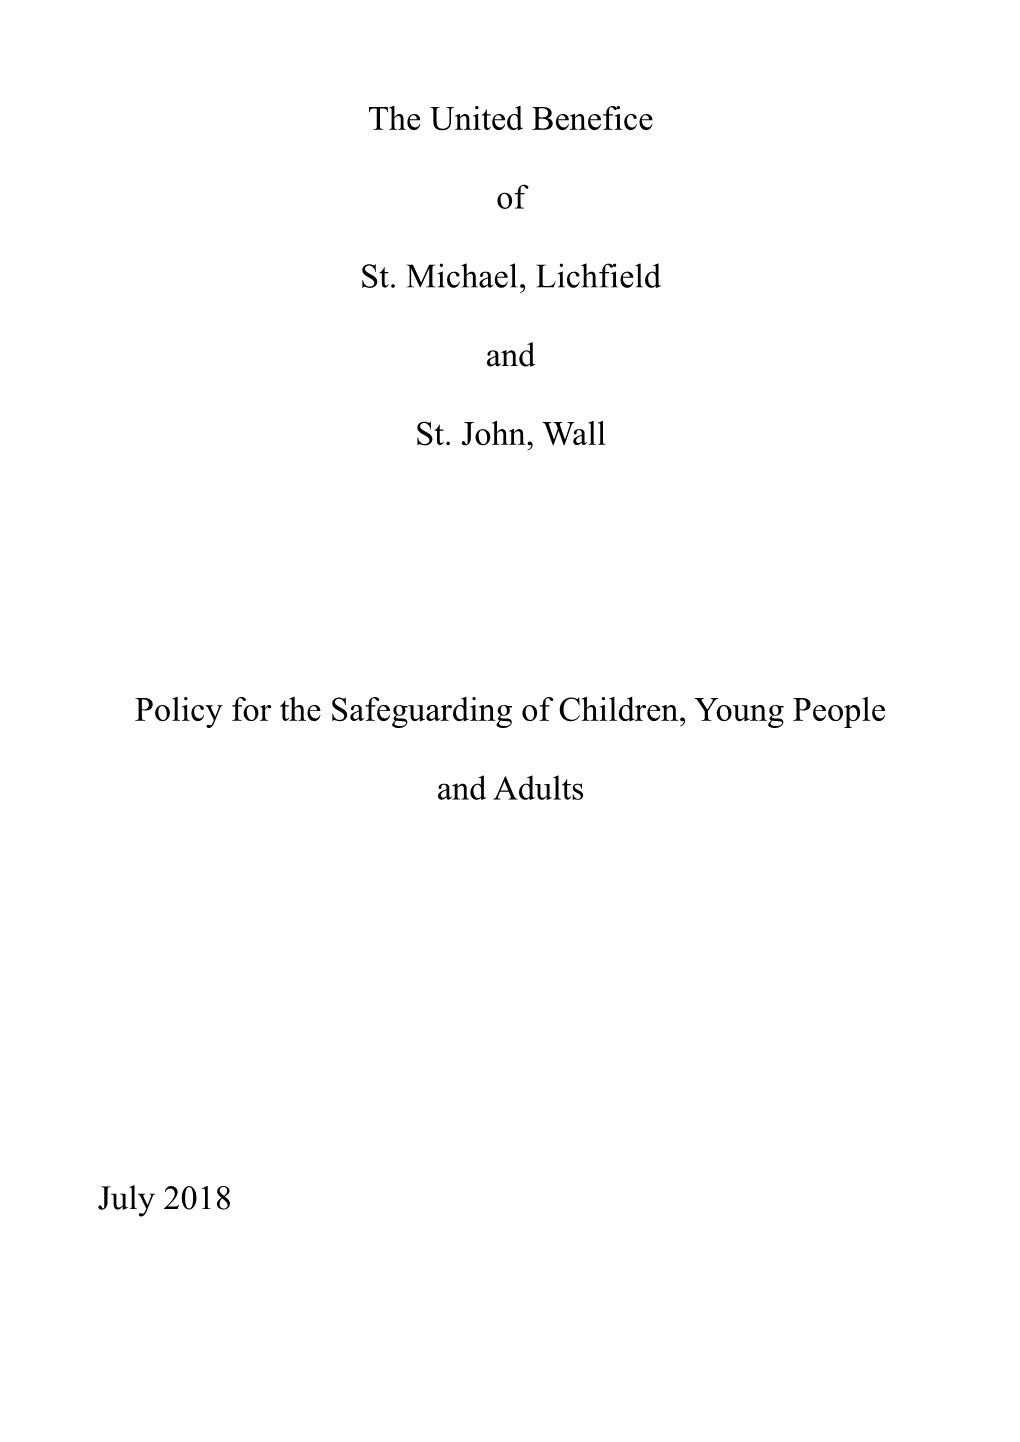 The United Benefice of St. Michael, Lichfield and St. John, Wall Policy